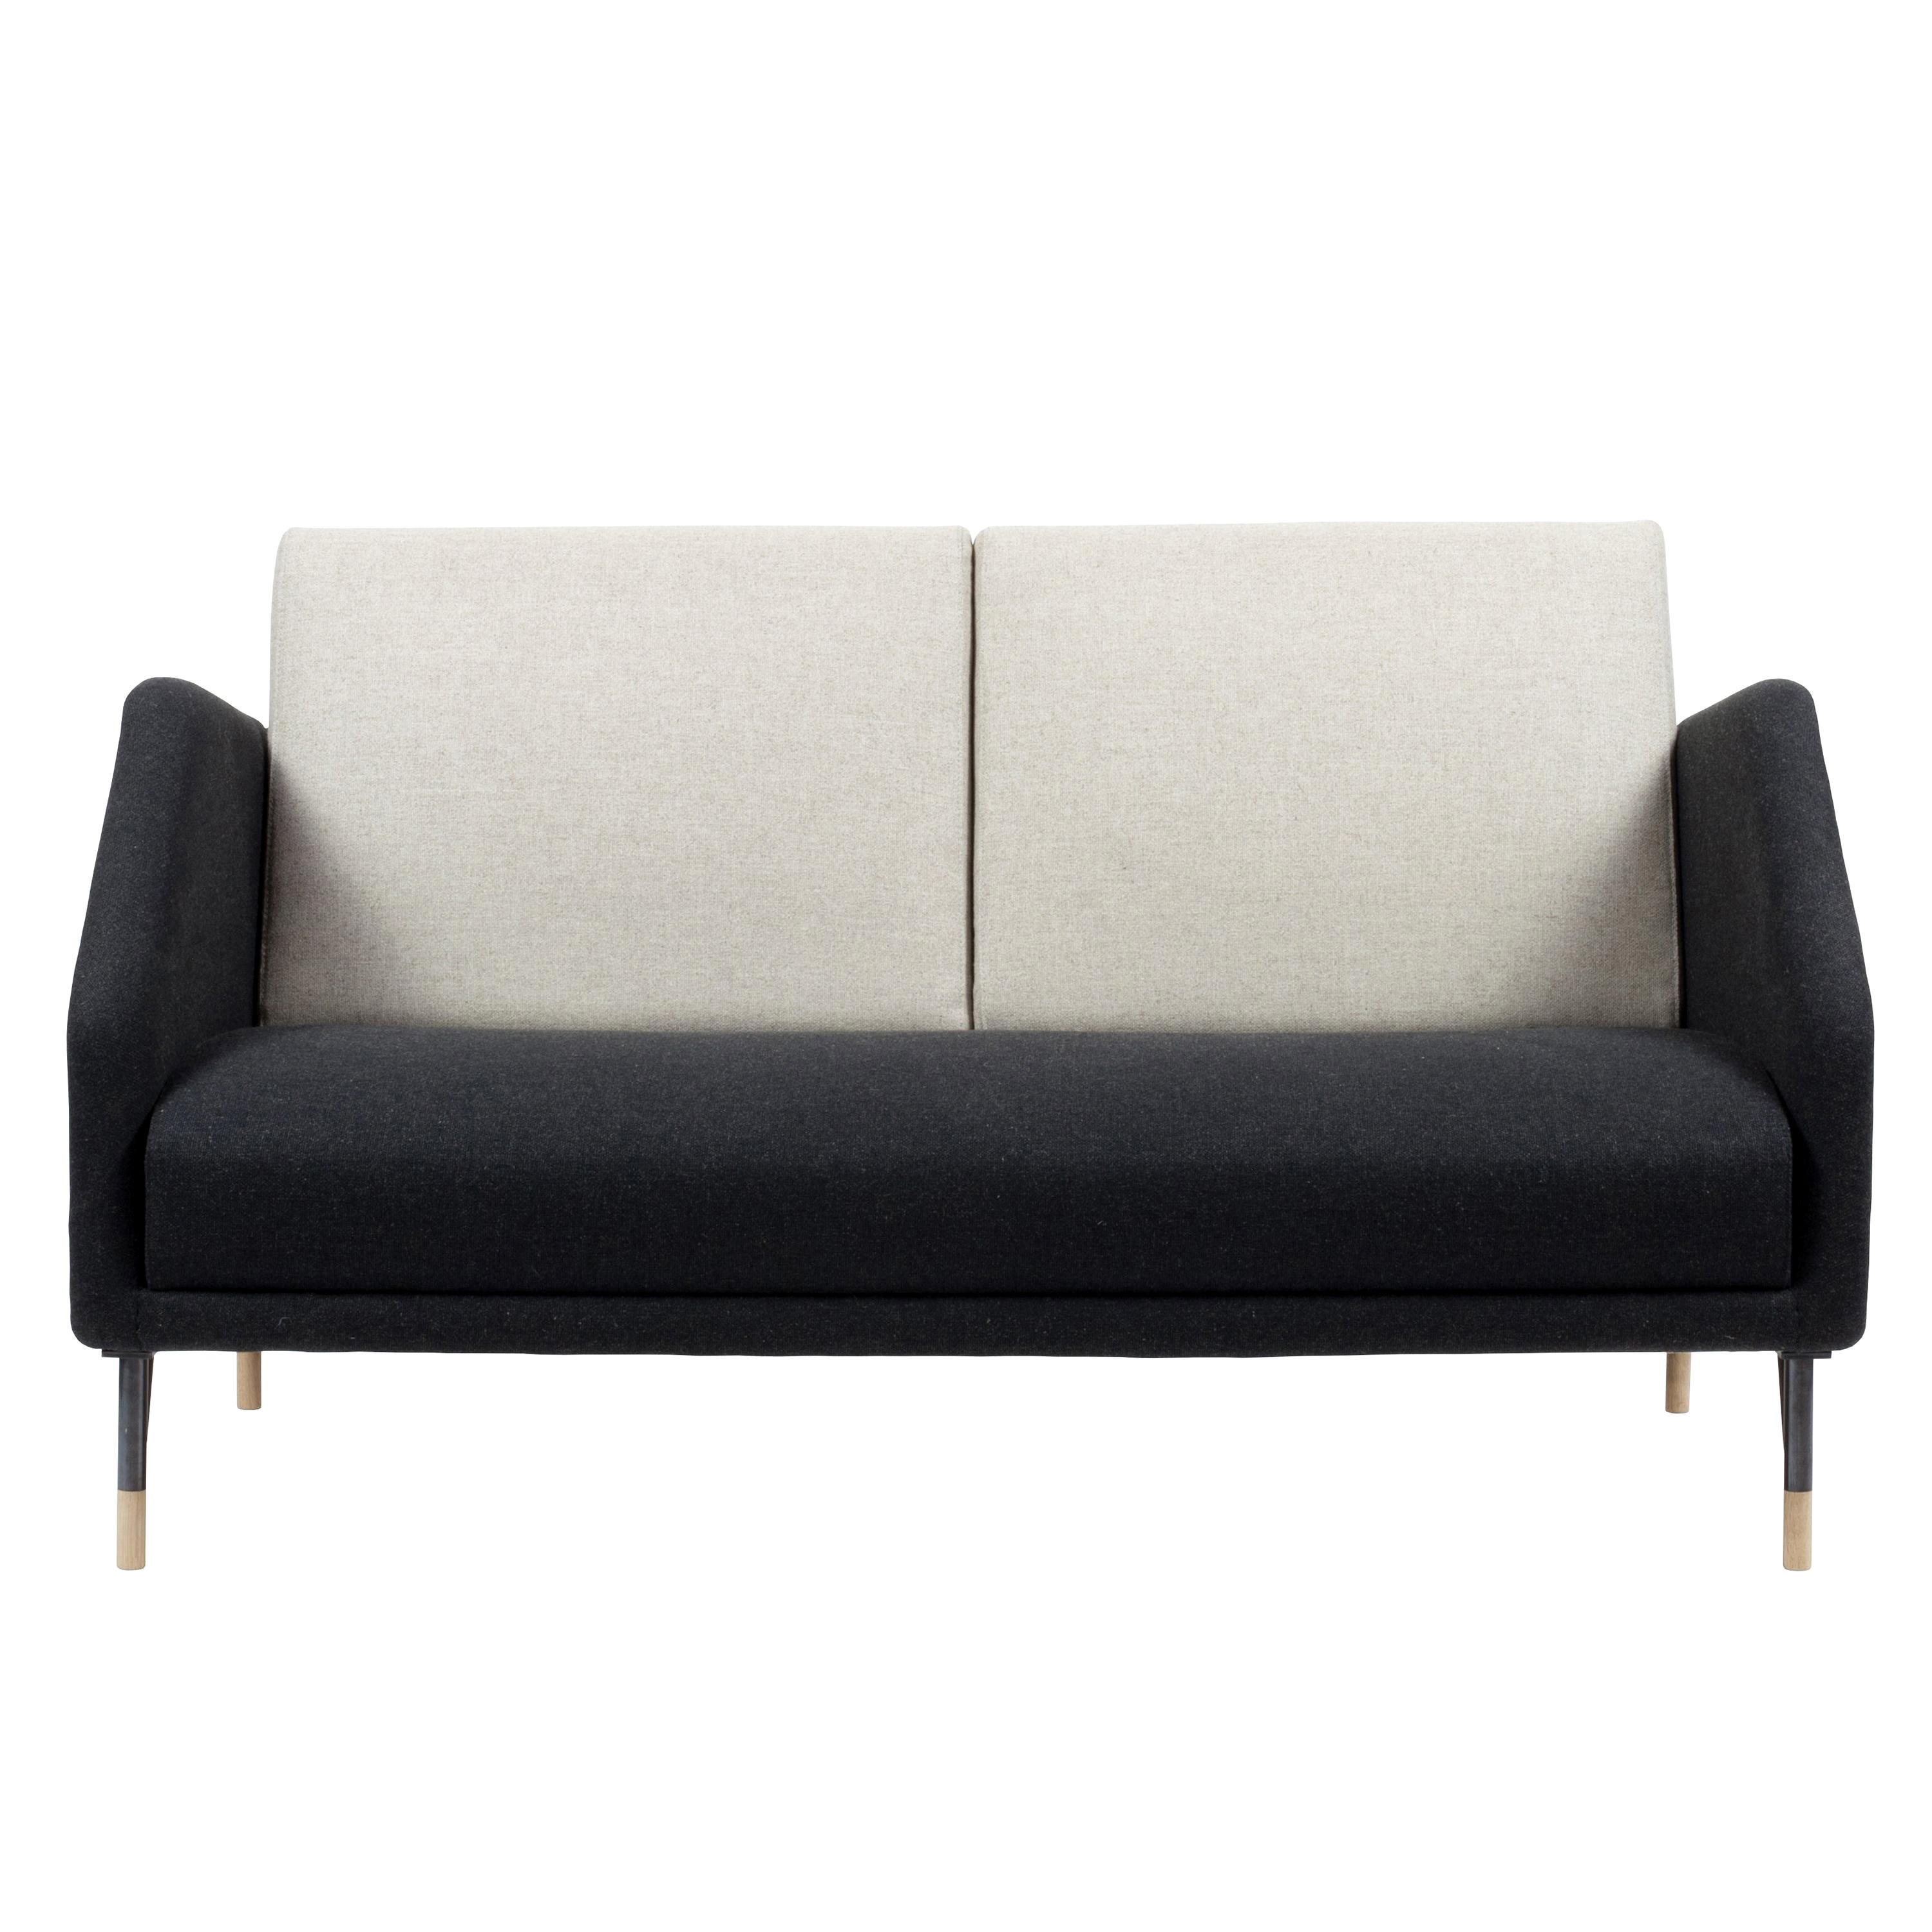 Finn Juhl 2-Seat 77 Sofa Couch, Wood and Fabric